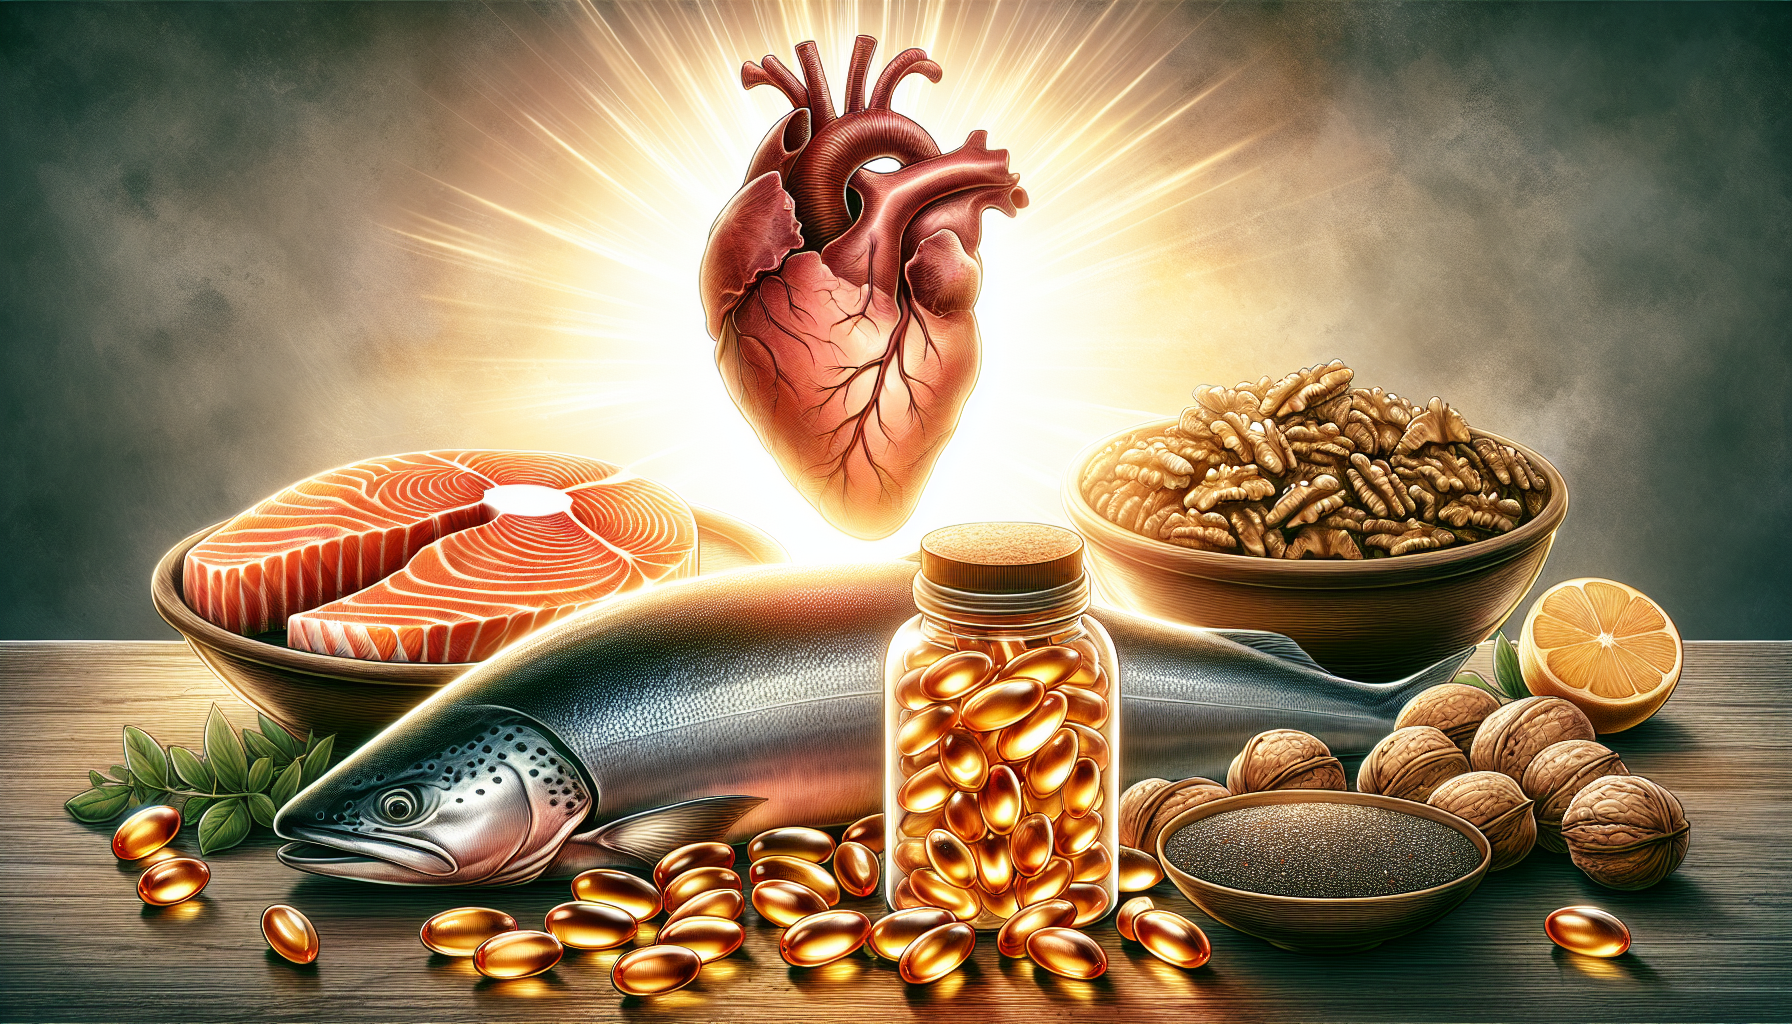 Illustration of fish oil capsules and sources of omega-3 fatty acids